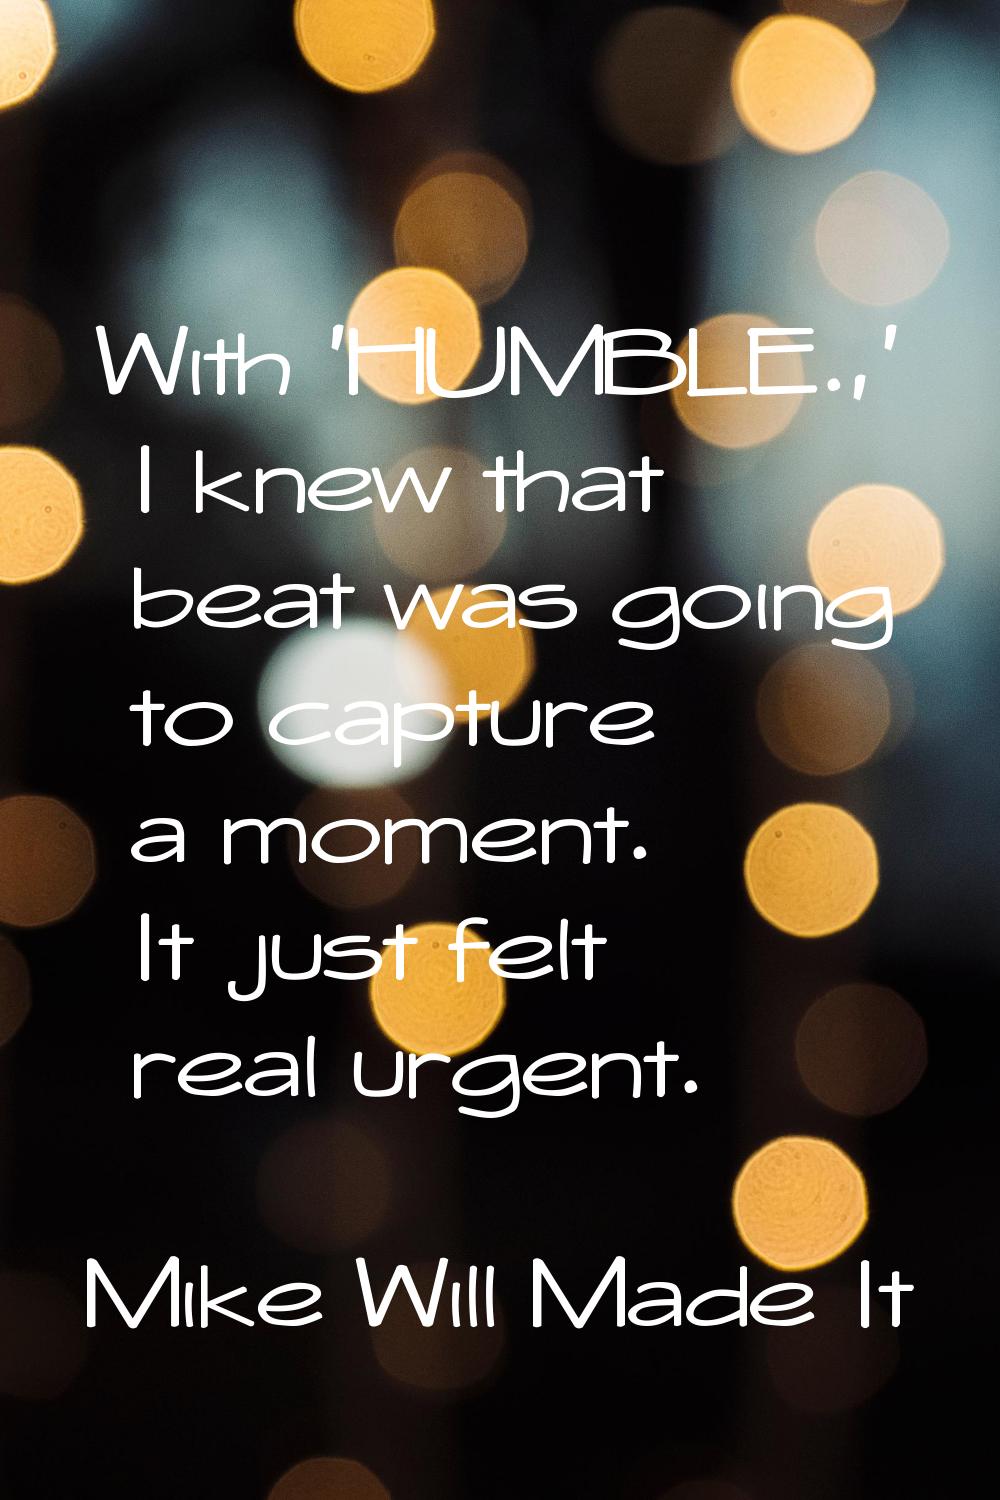 With 'HUMBLE.,' I knew that beat was going to capture a moment. It just felt real urgent.